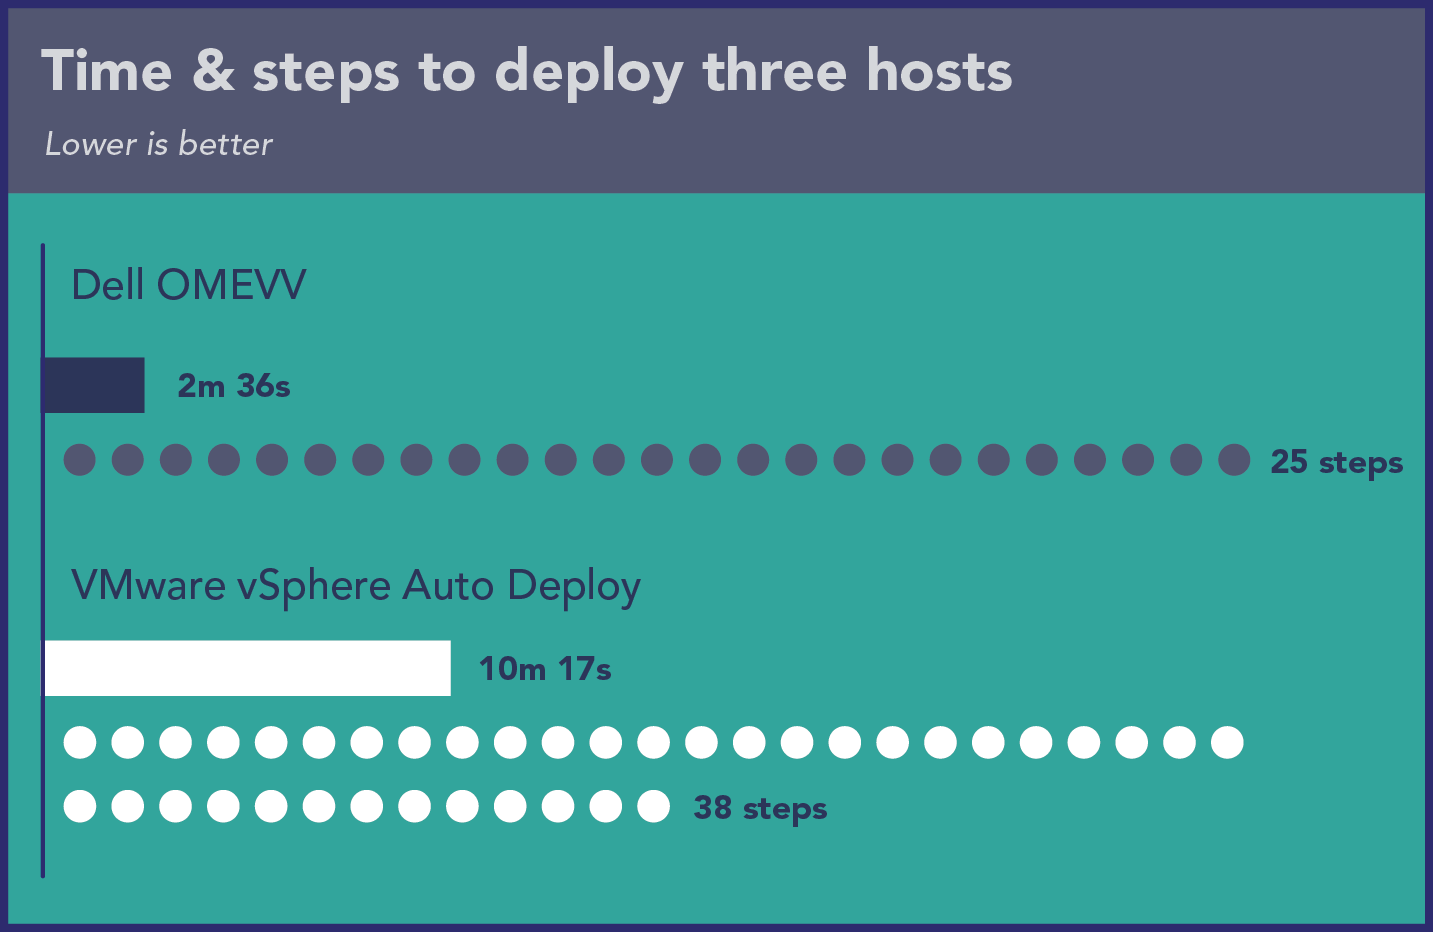 Chart of time and steps to deploy three servers. Dell OMEVV shows 2 minutes 36 seconds and 25 steps. VMware vSphere Auto Deploy shows 10 minutes 17 seconds and 38 steps.